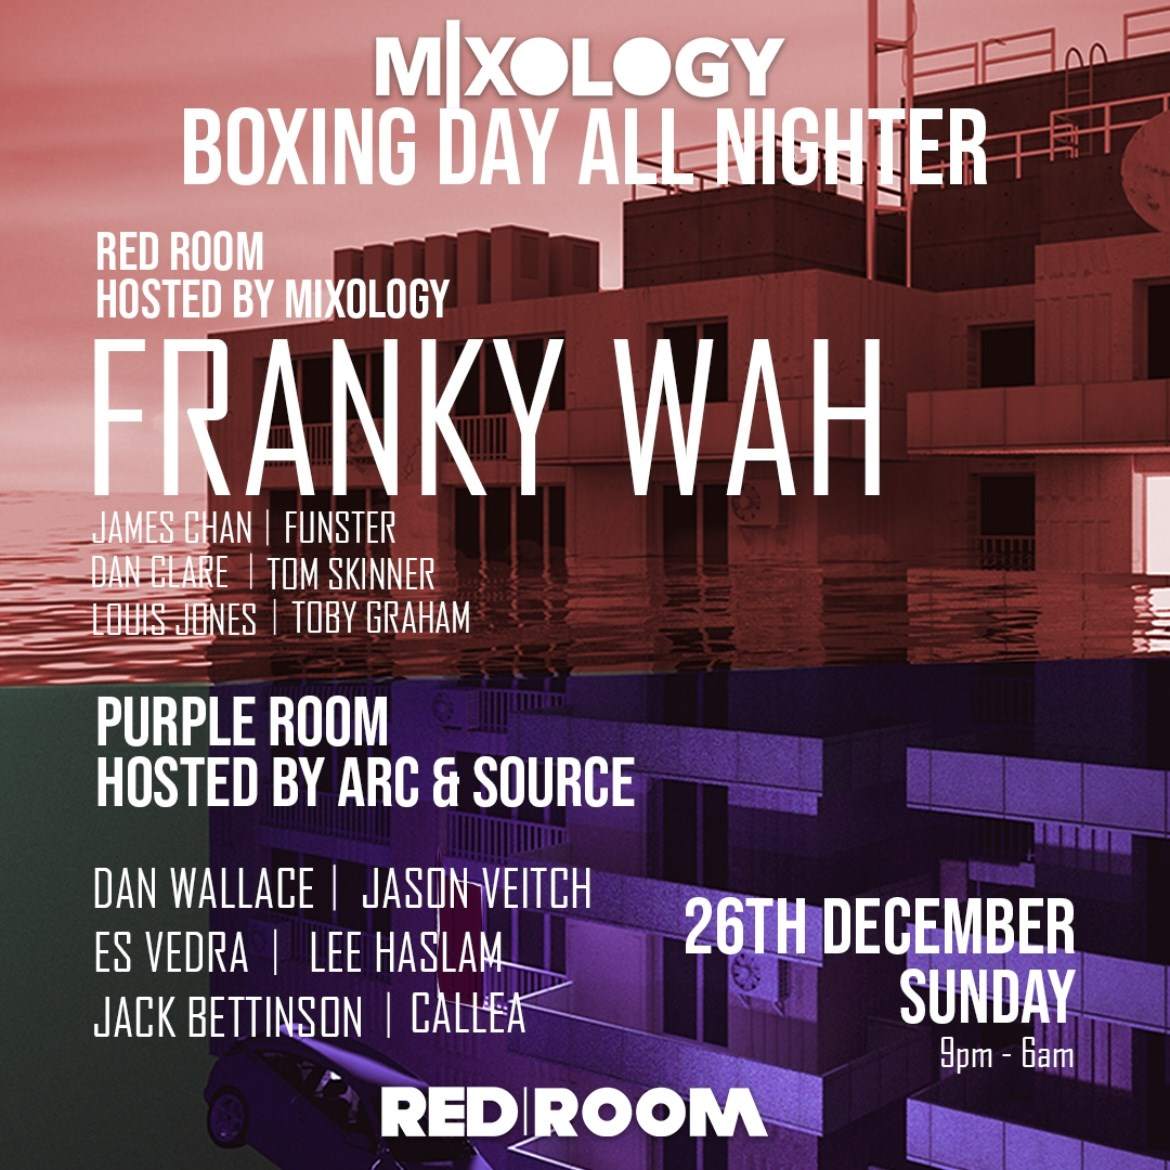 MIXOLOGY presents Franky Wah *Boxing Day All Nighter* - フライヤー表